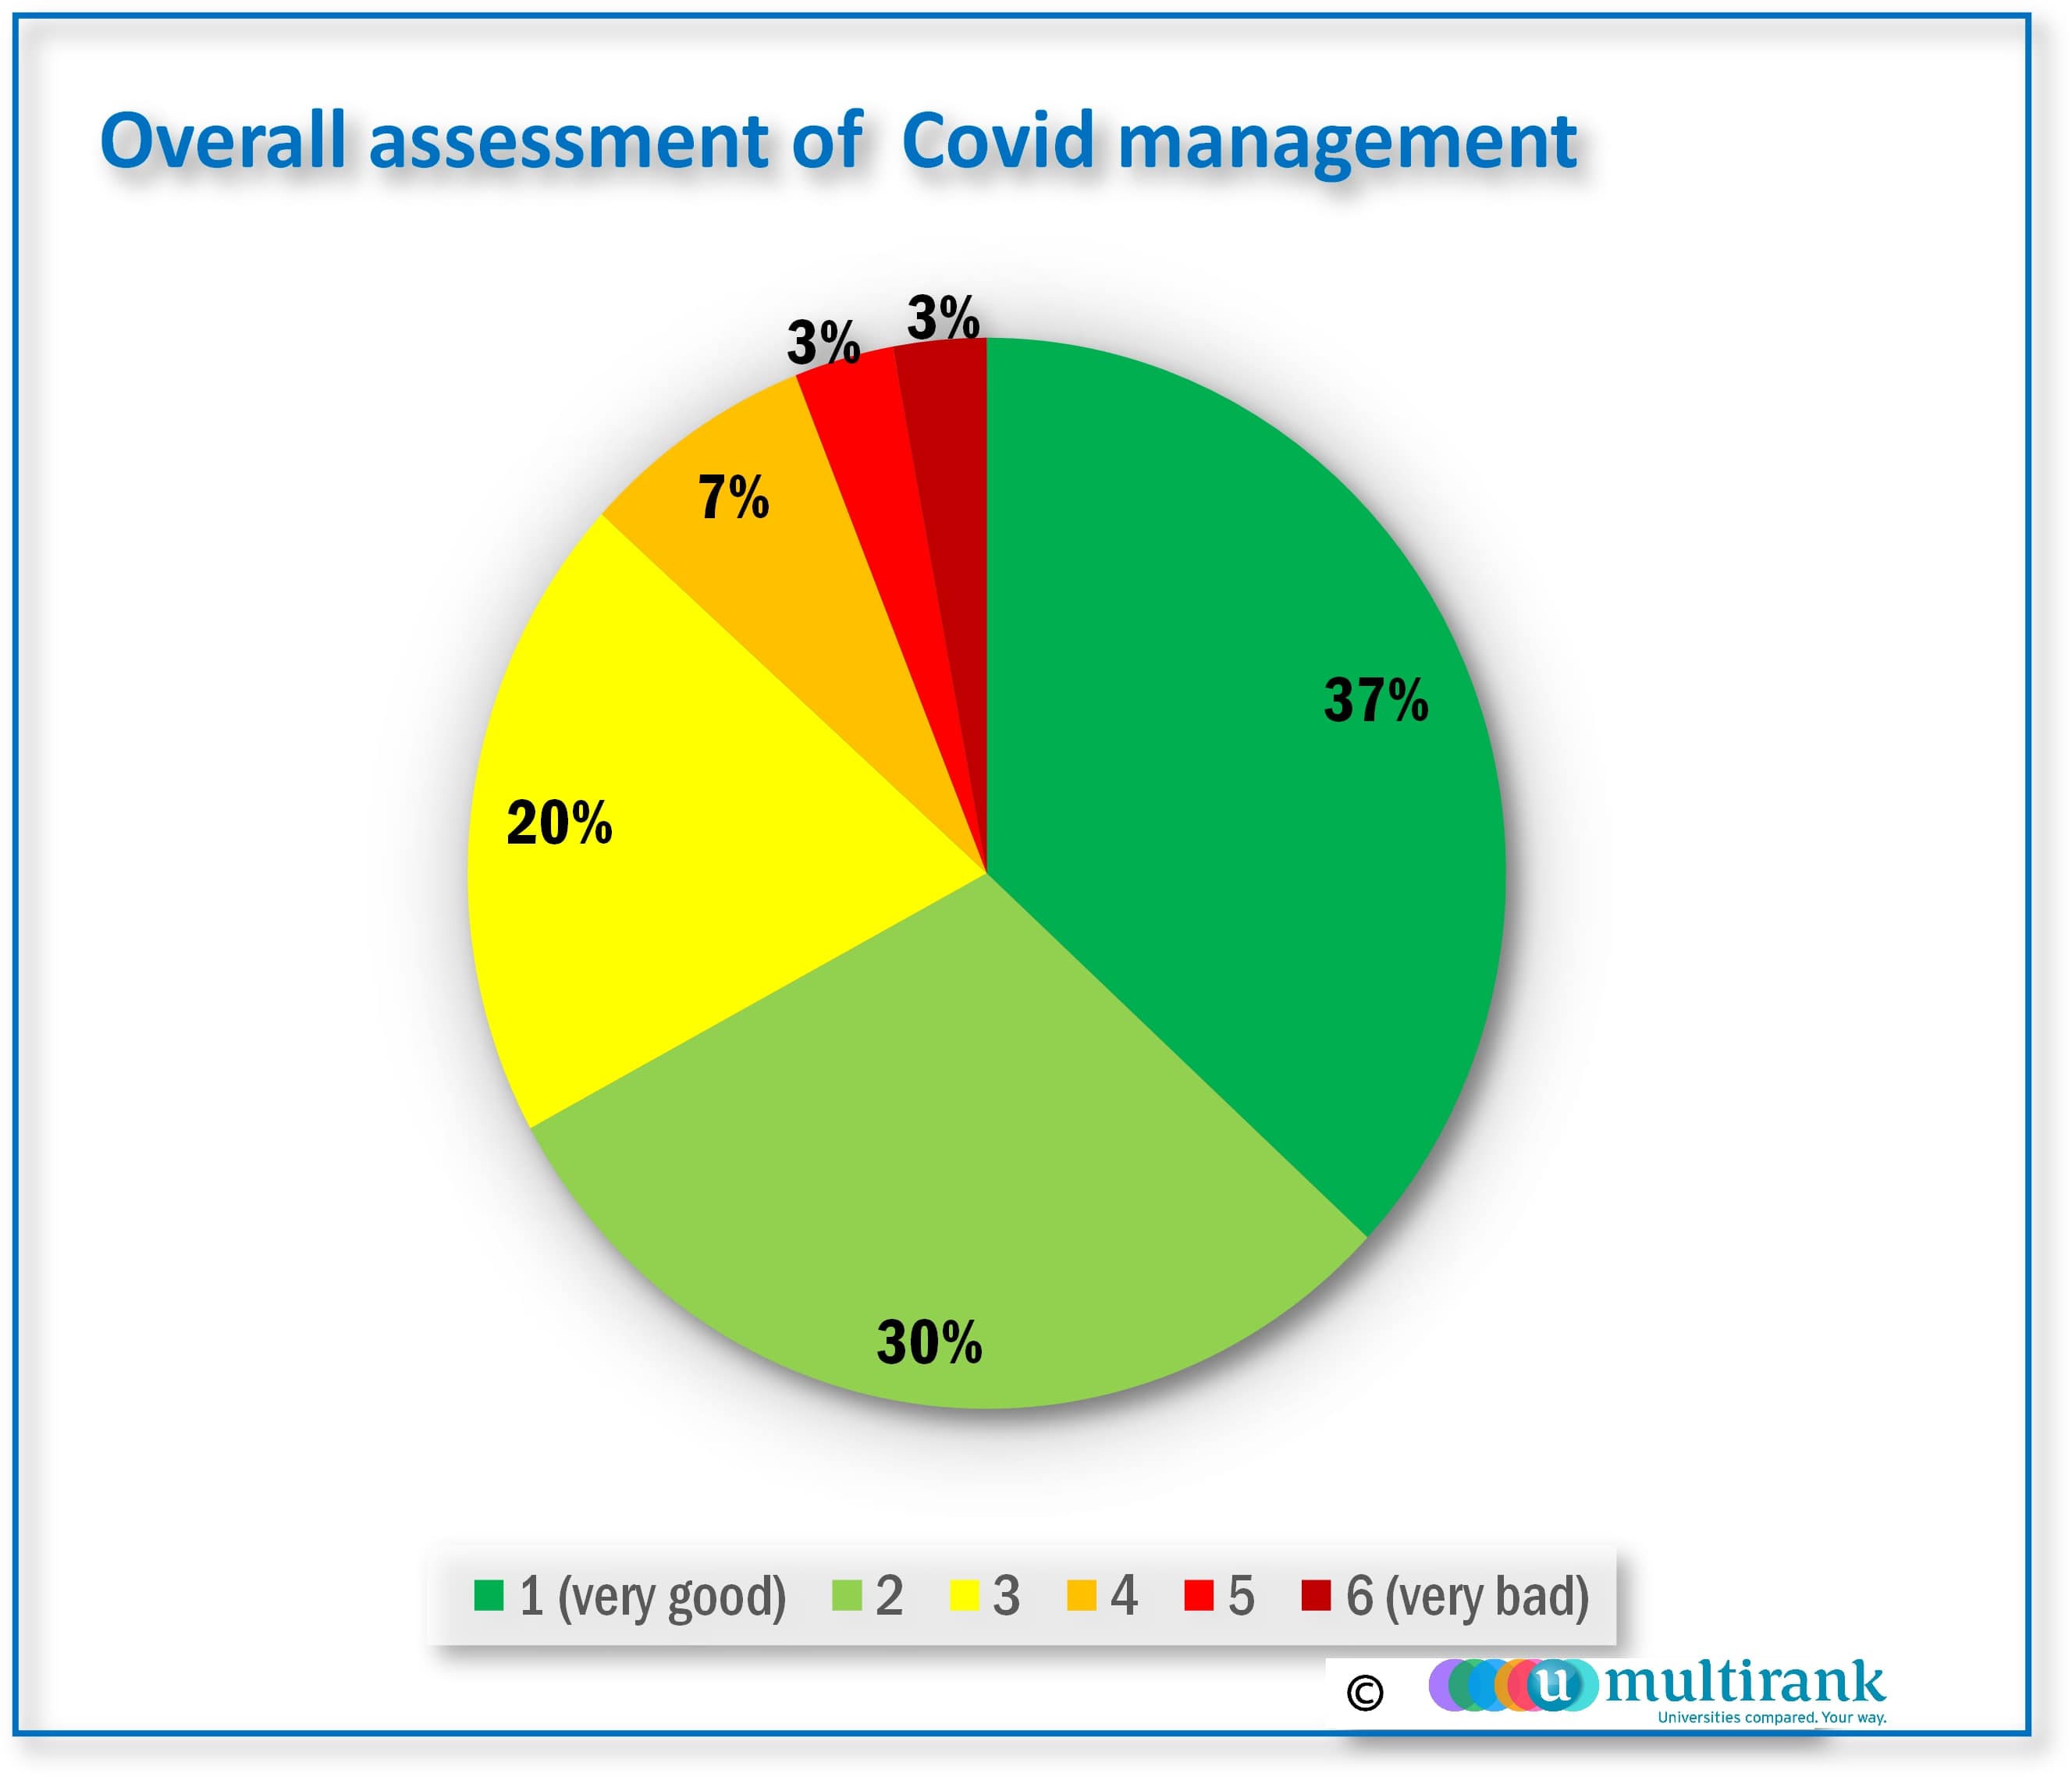 Overall assessment of Covid-19 management